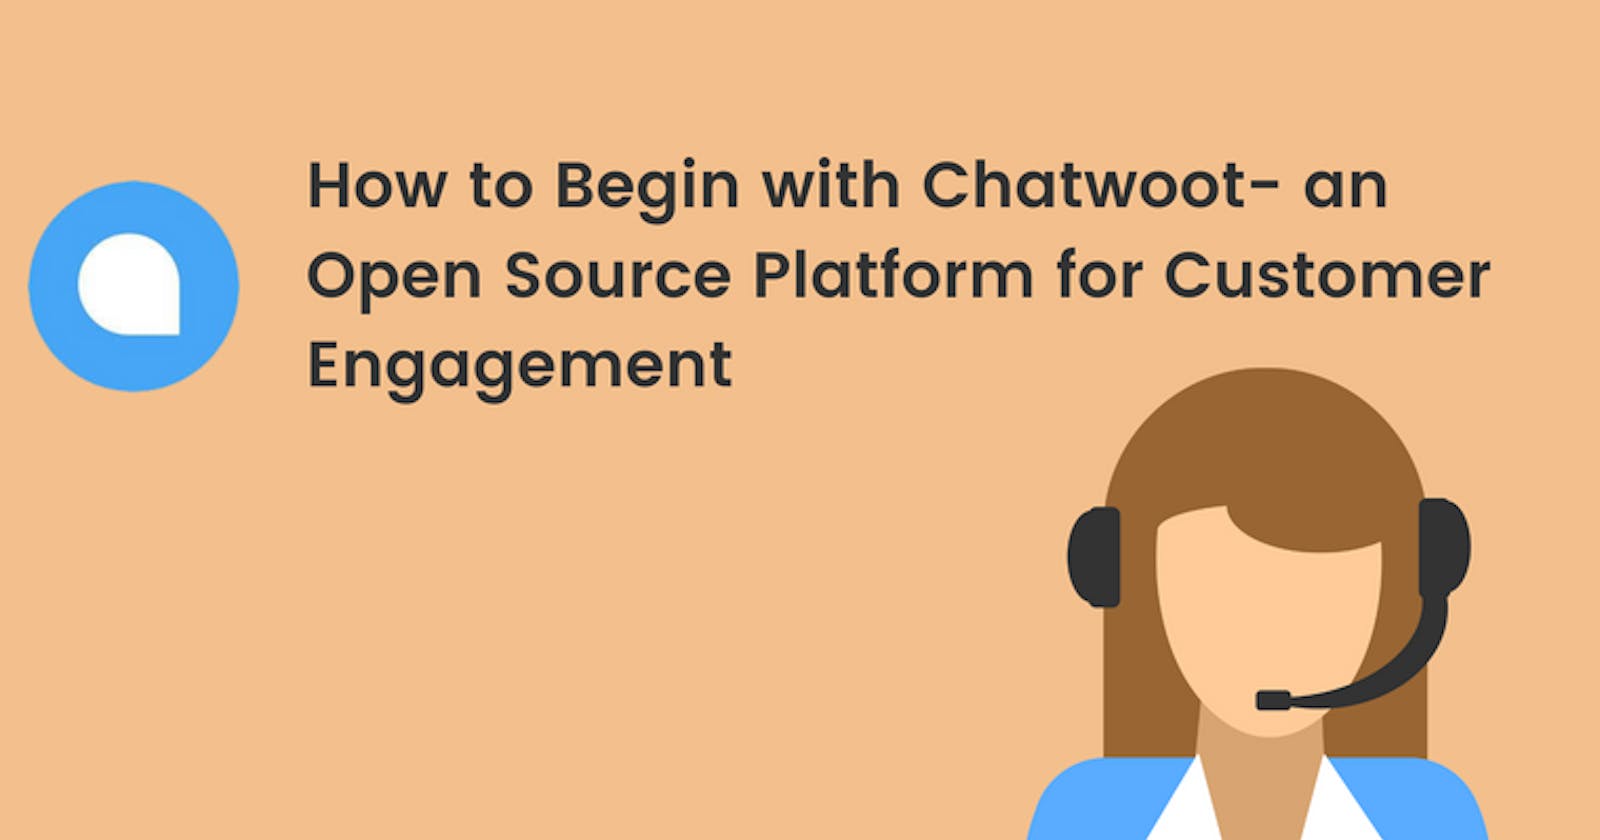 How to Begin with Chatwoot- an Open Source Platform for Customer Engagement